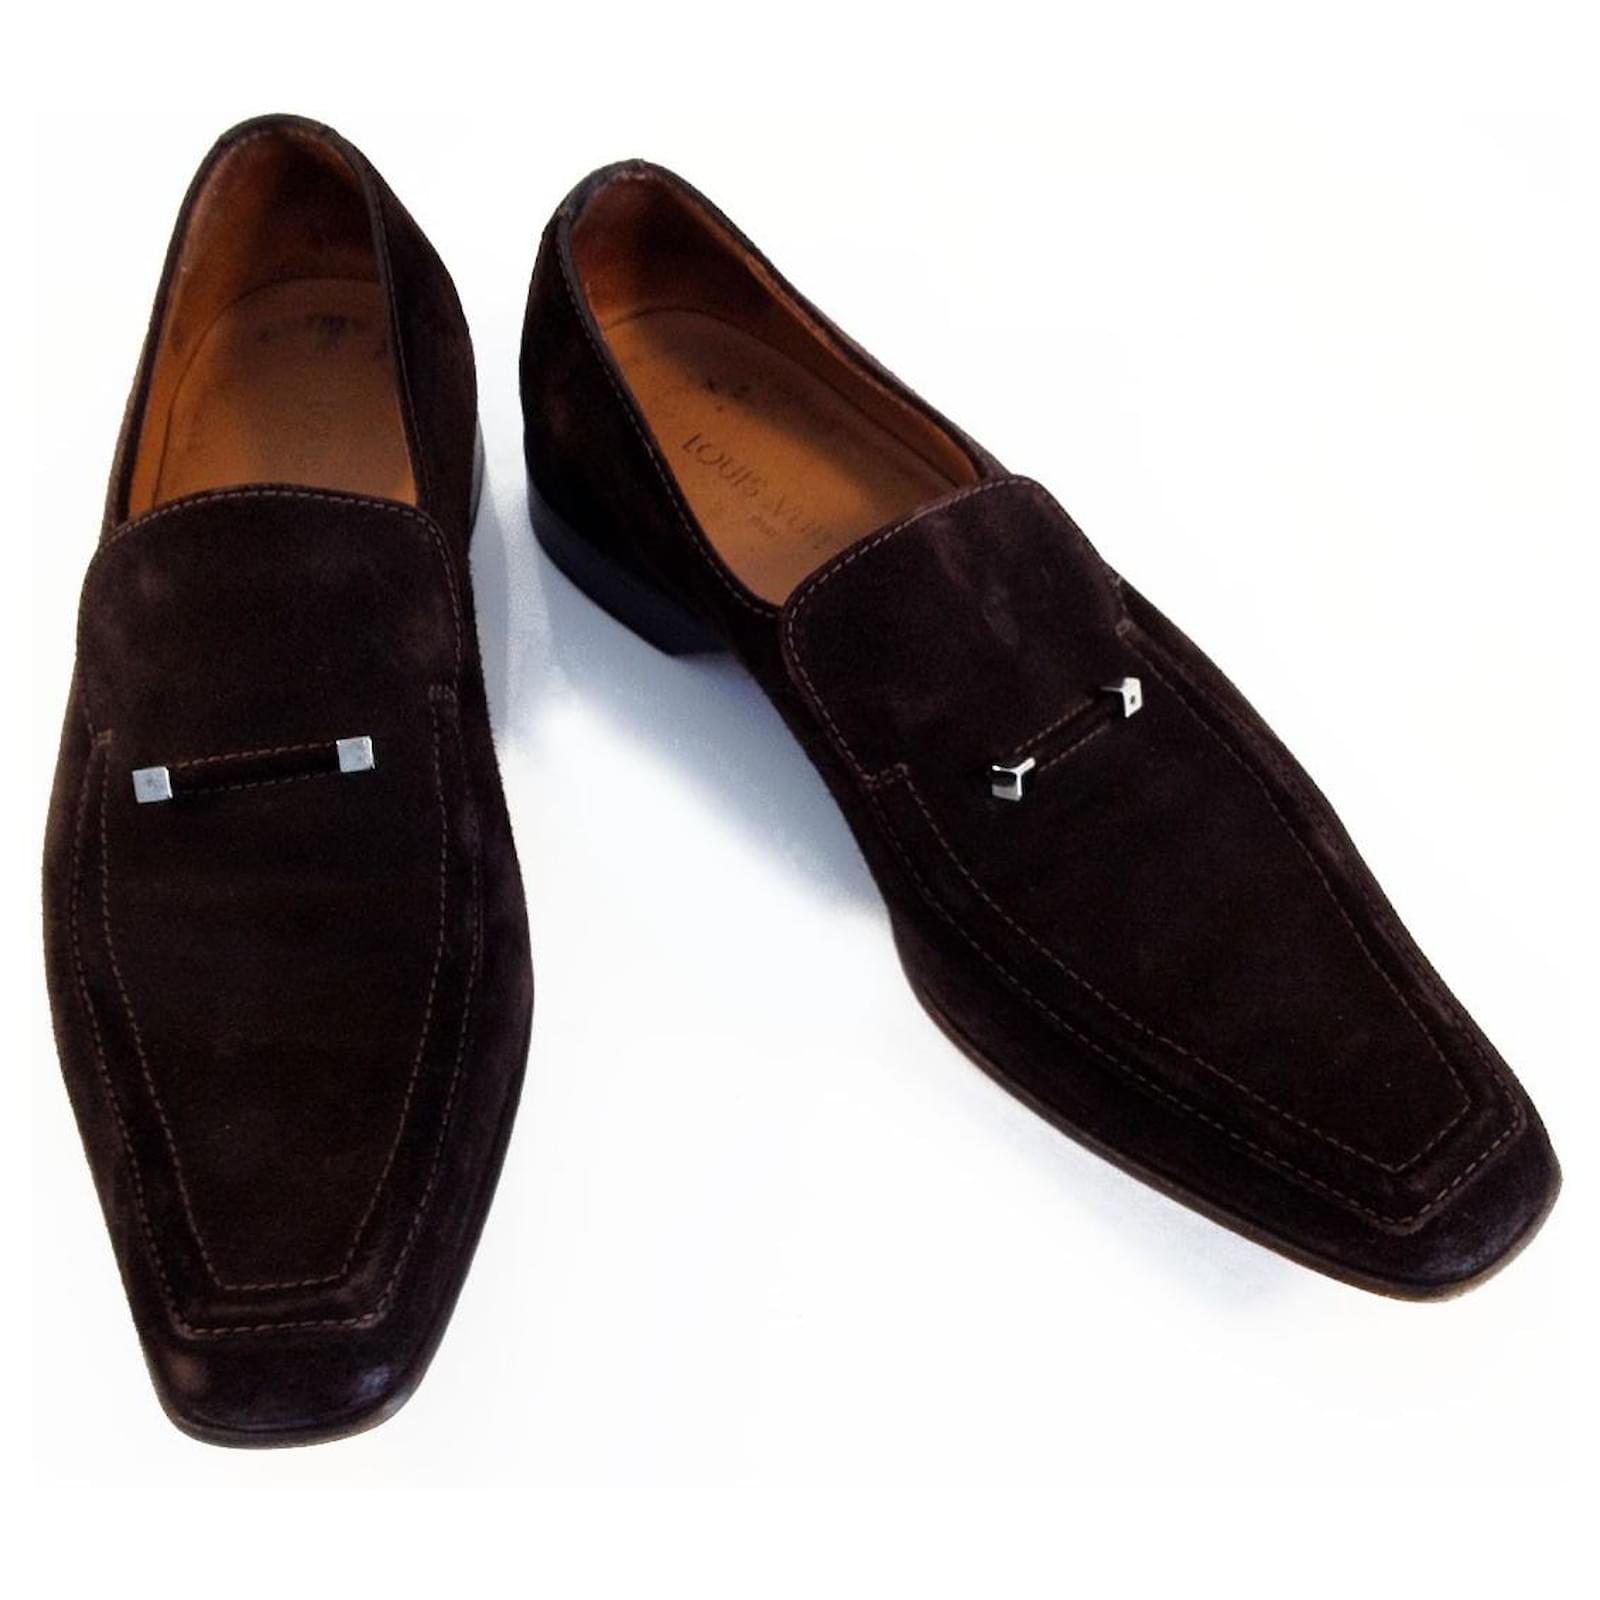 LV loafers  Classic shoes, Lv loafers, Loafers